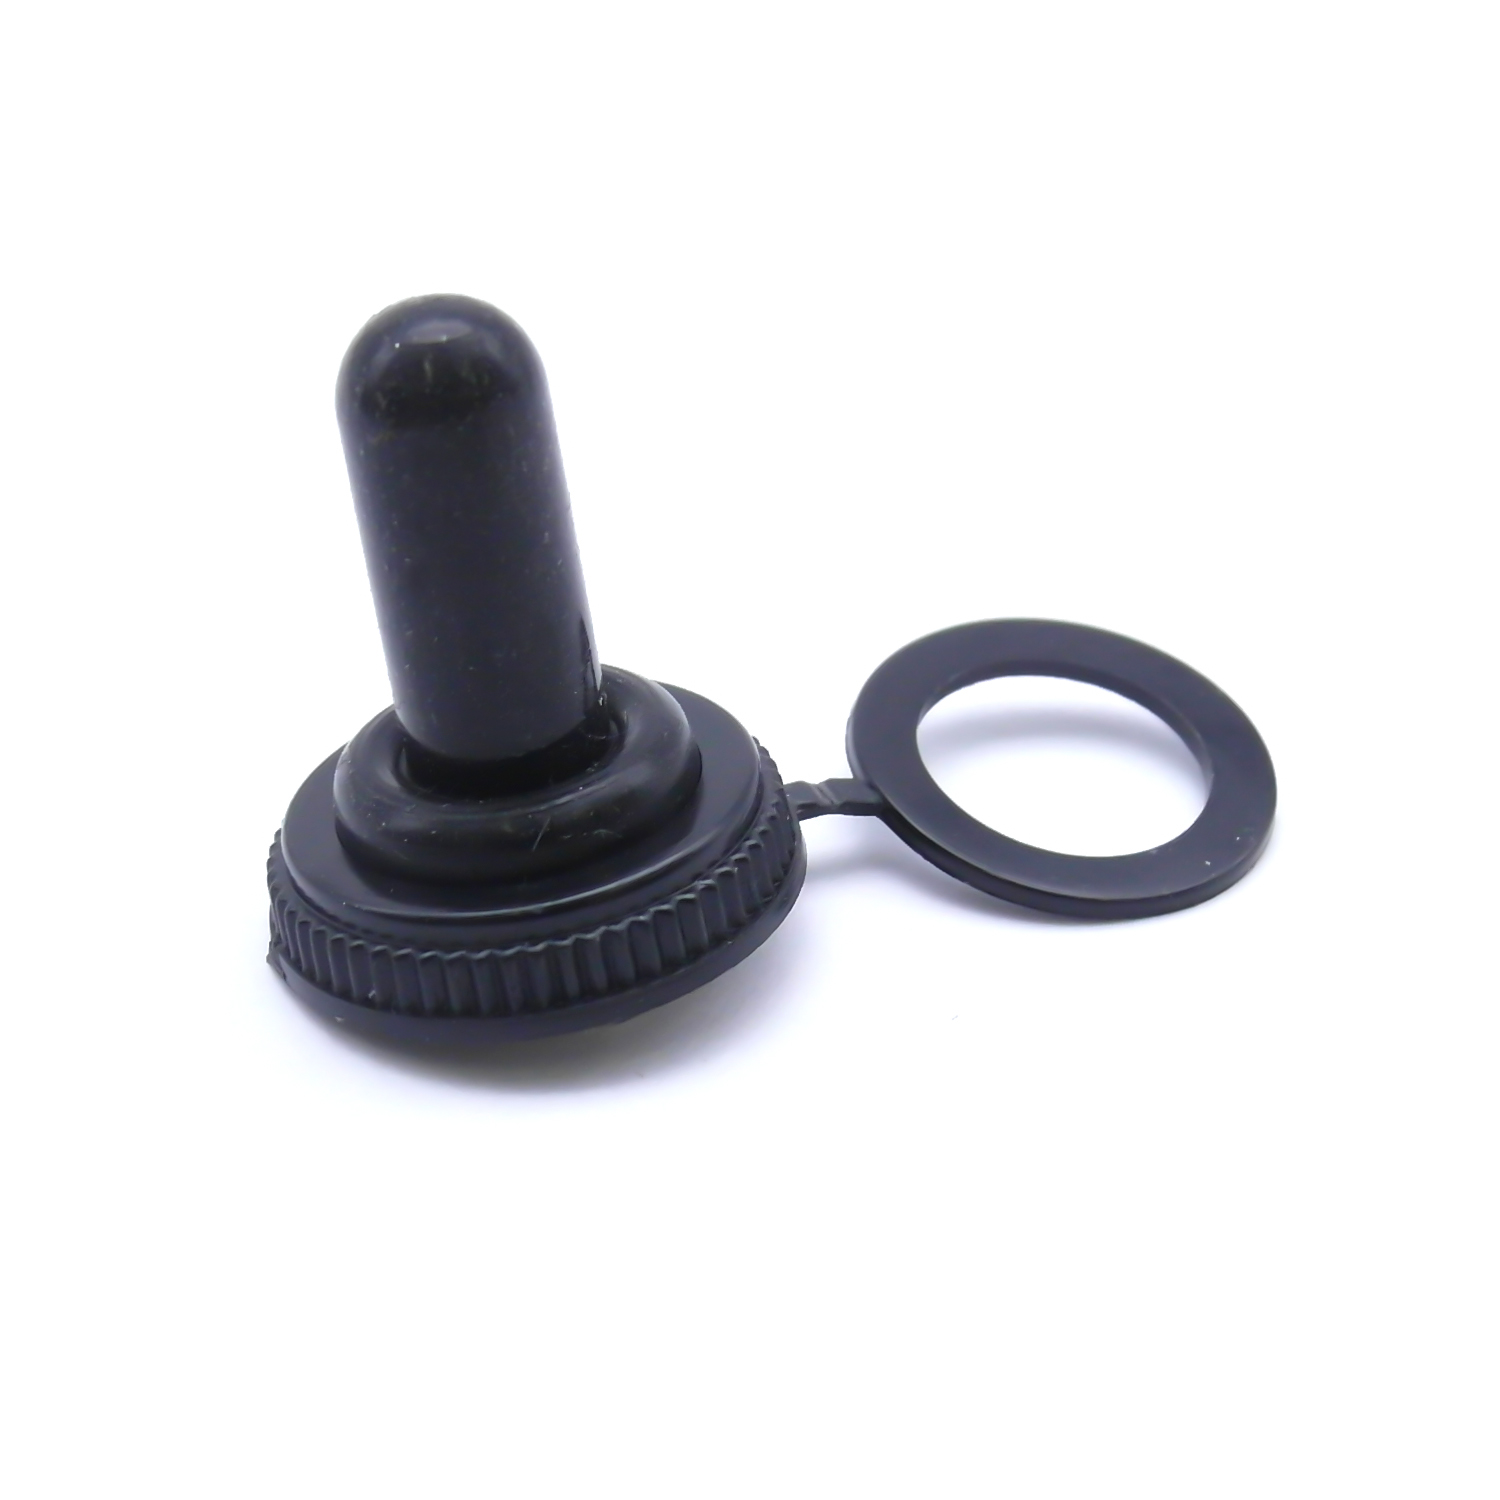 TrendBox 1 Pack (100pcs) Black 12mm For Toggle Switch Rubber Water Resistance Boot Cover Cap Waterproof Rainproof Lid - image 4 of 5